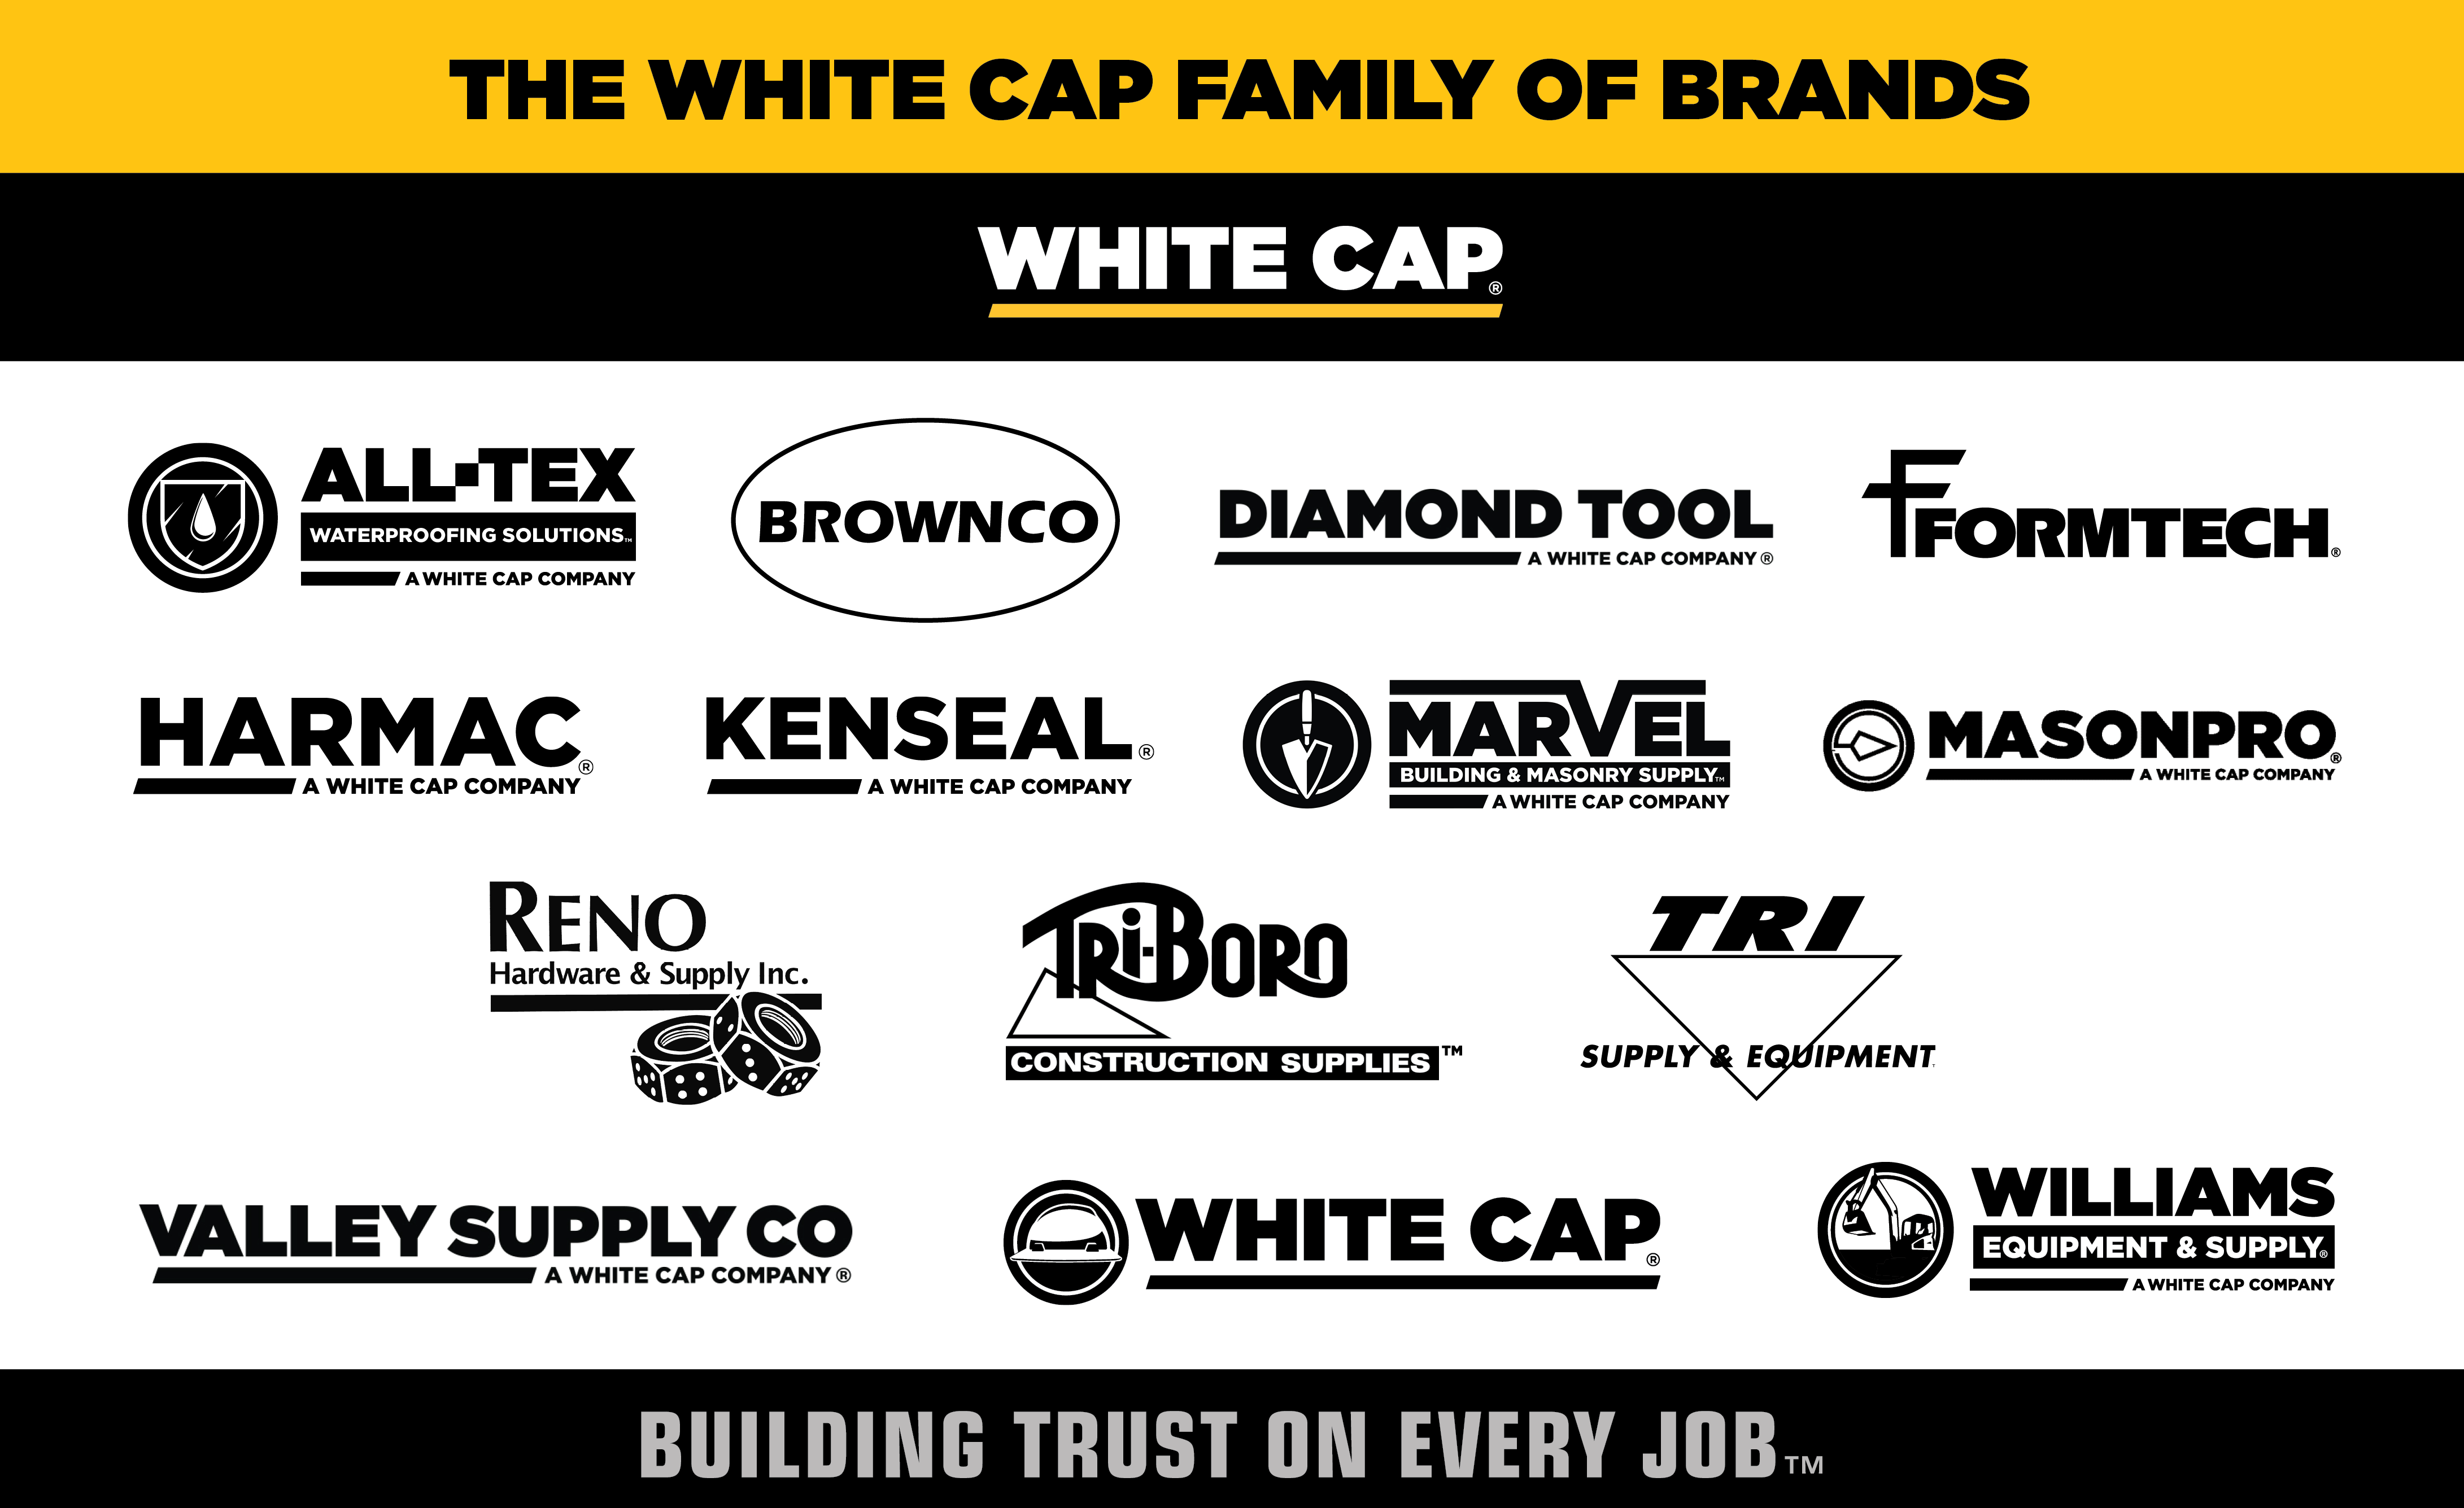 Family of brands image